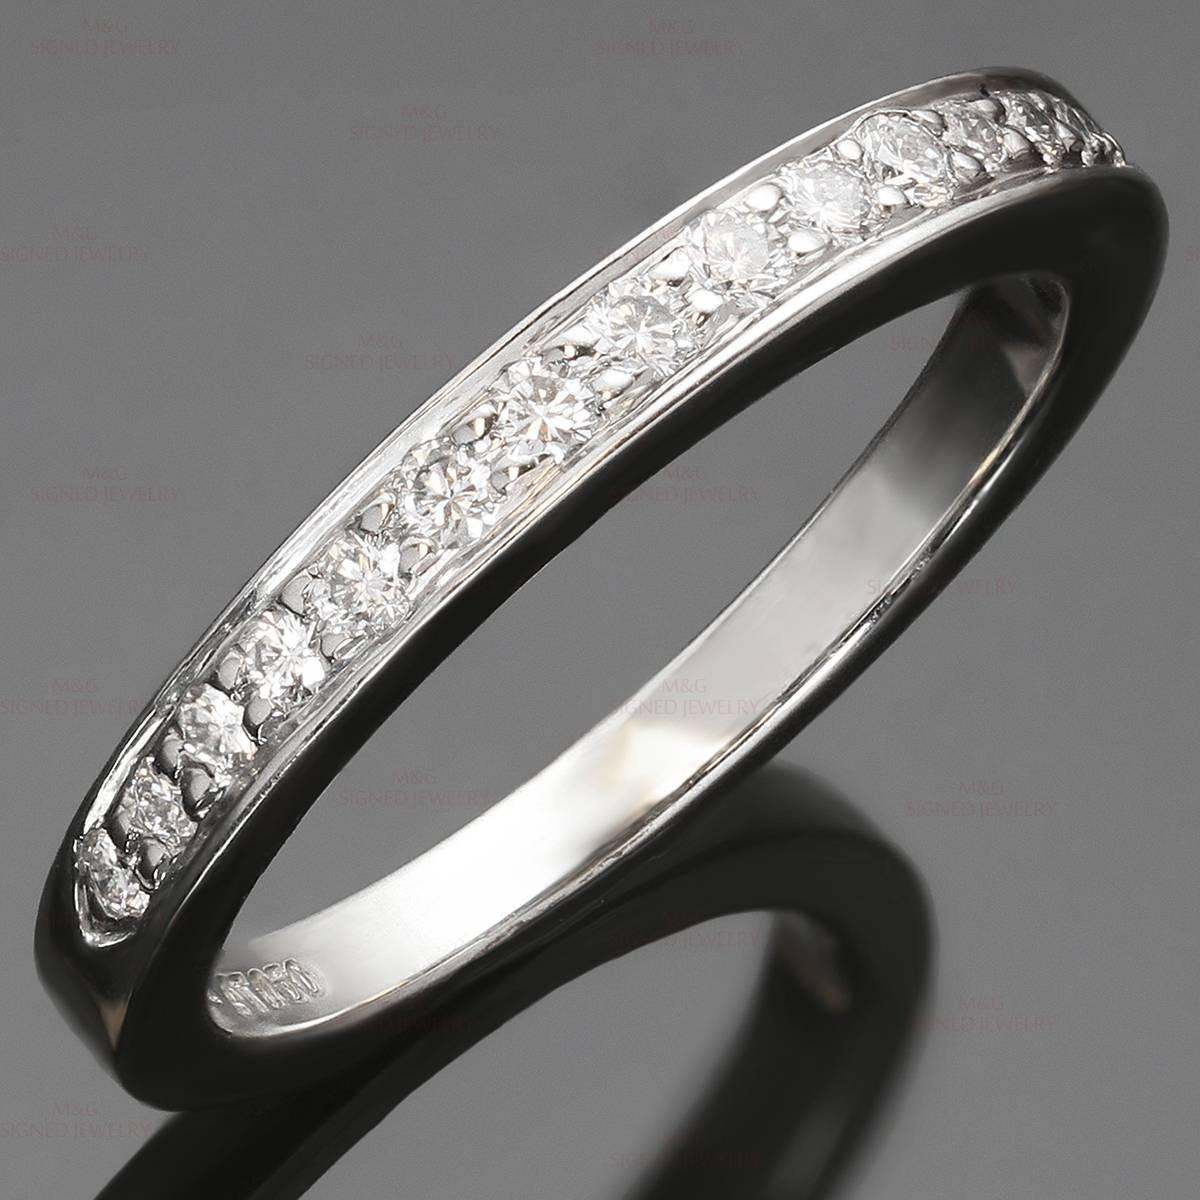 This classic Tiffany & Co. wedding band is crafted in fine platinum and set with a half-circle of brilliant-cut round diamonds of an estimated 0.22 carats. Made in United States circa 2010s. Measurements: 2.5mm width. The ring size is 6 - EU 52.